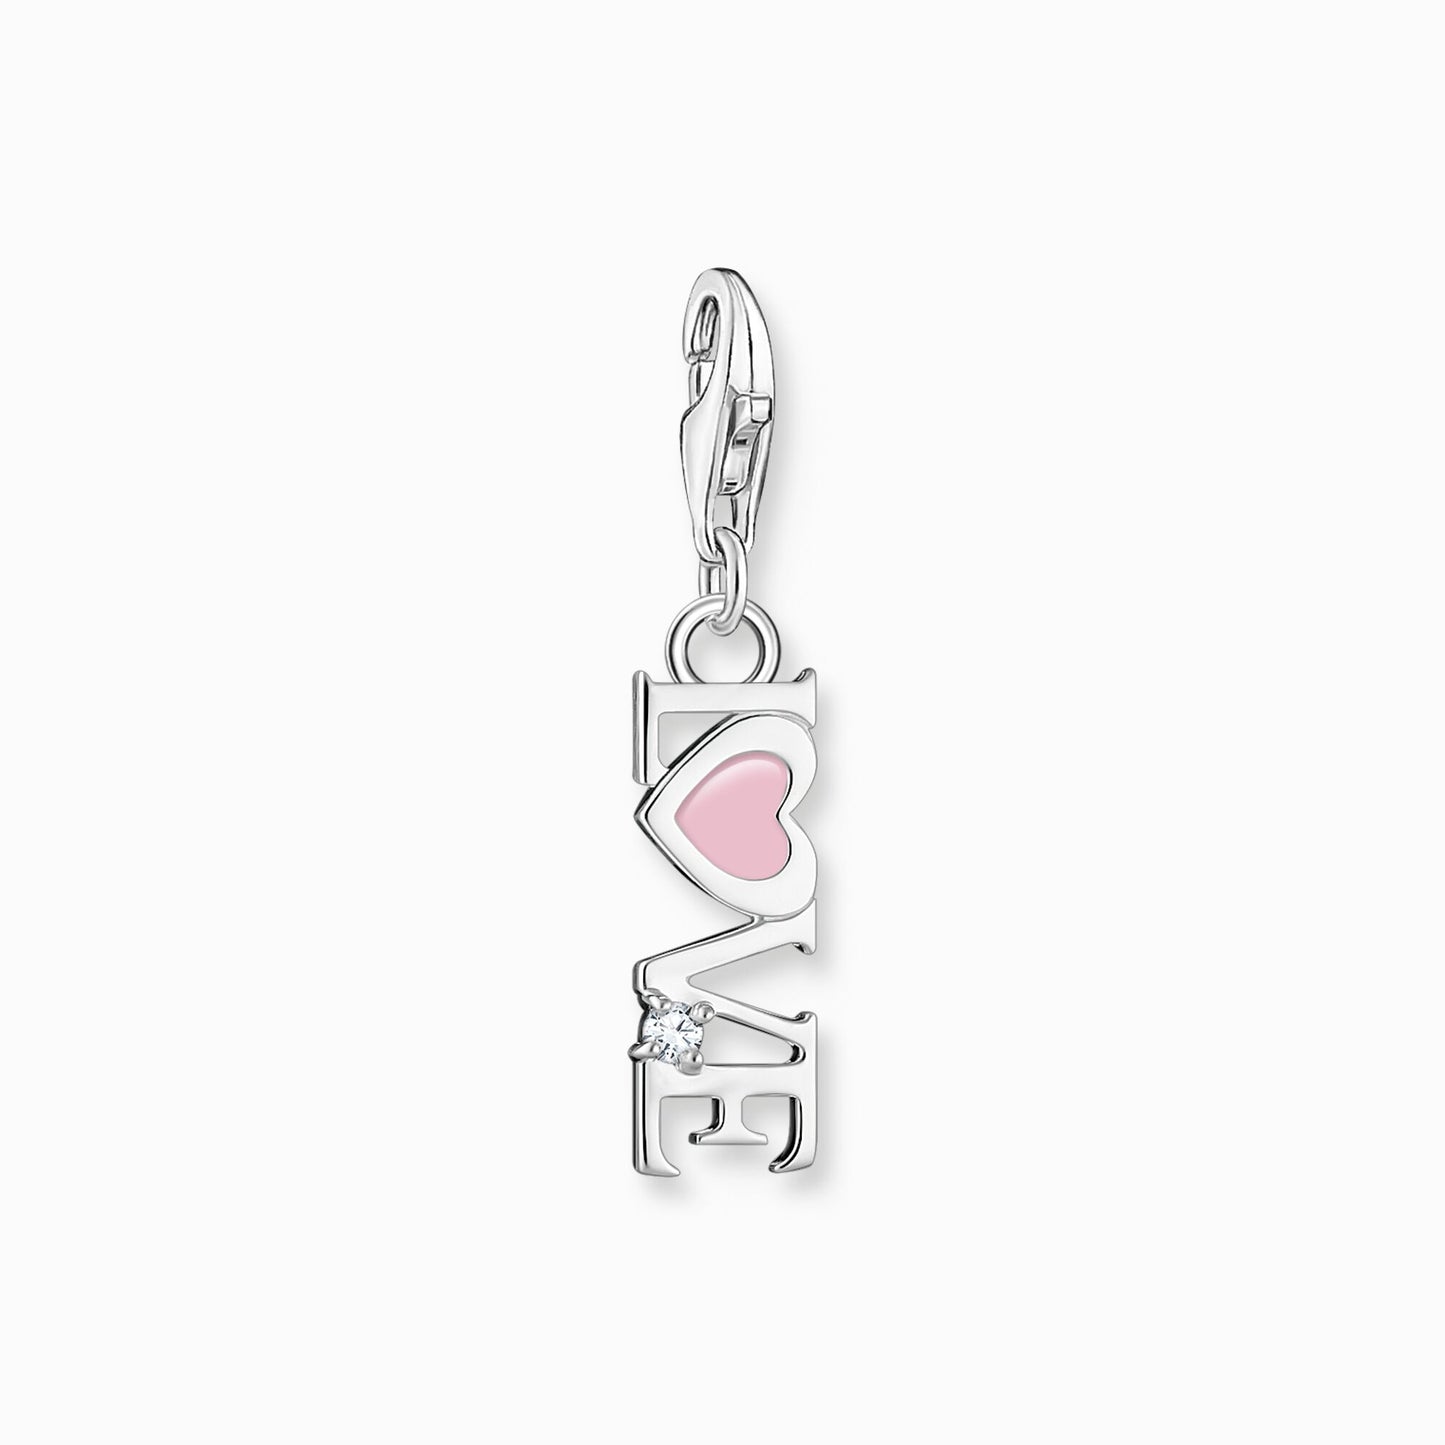 Thomas Sabo Charm Pendant Love With Pink Heart And Stone Silver 2011-041-9